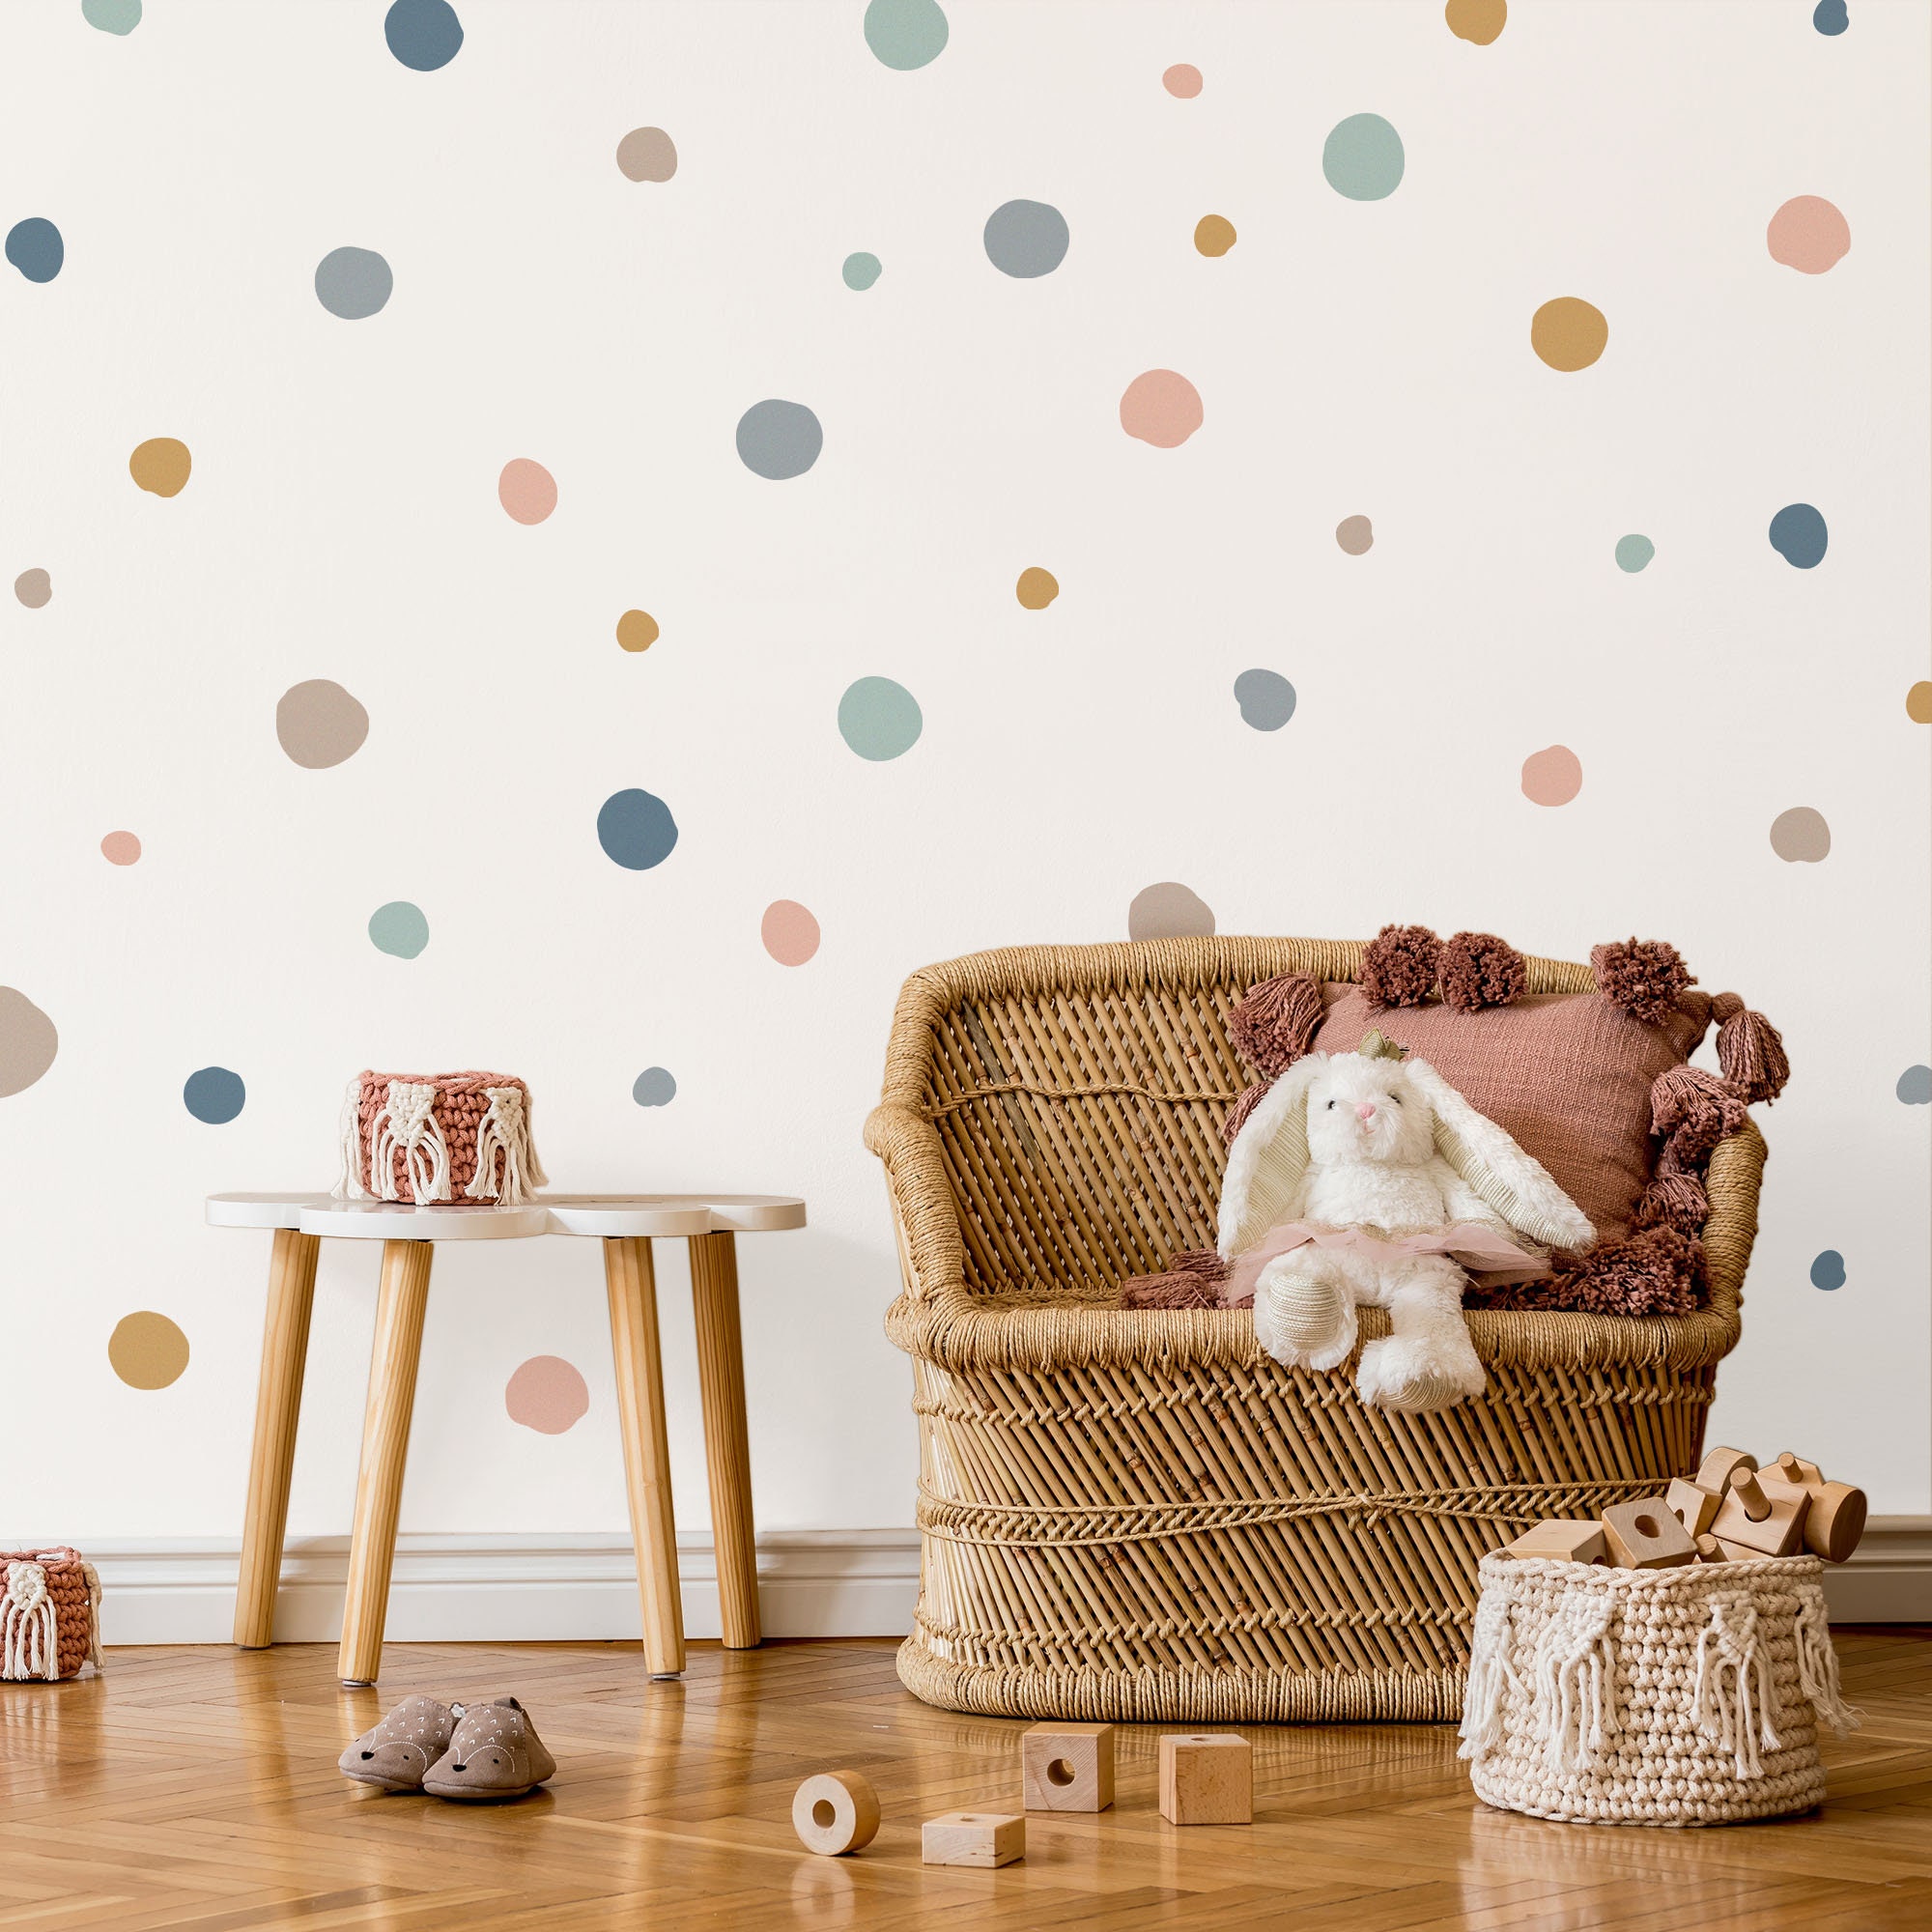 Frost / Etched Glass Polka Dot Decals – Polka Dot Wall Stickers